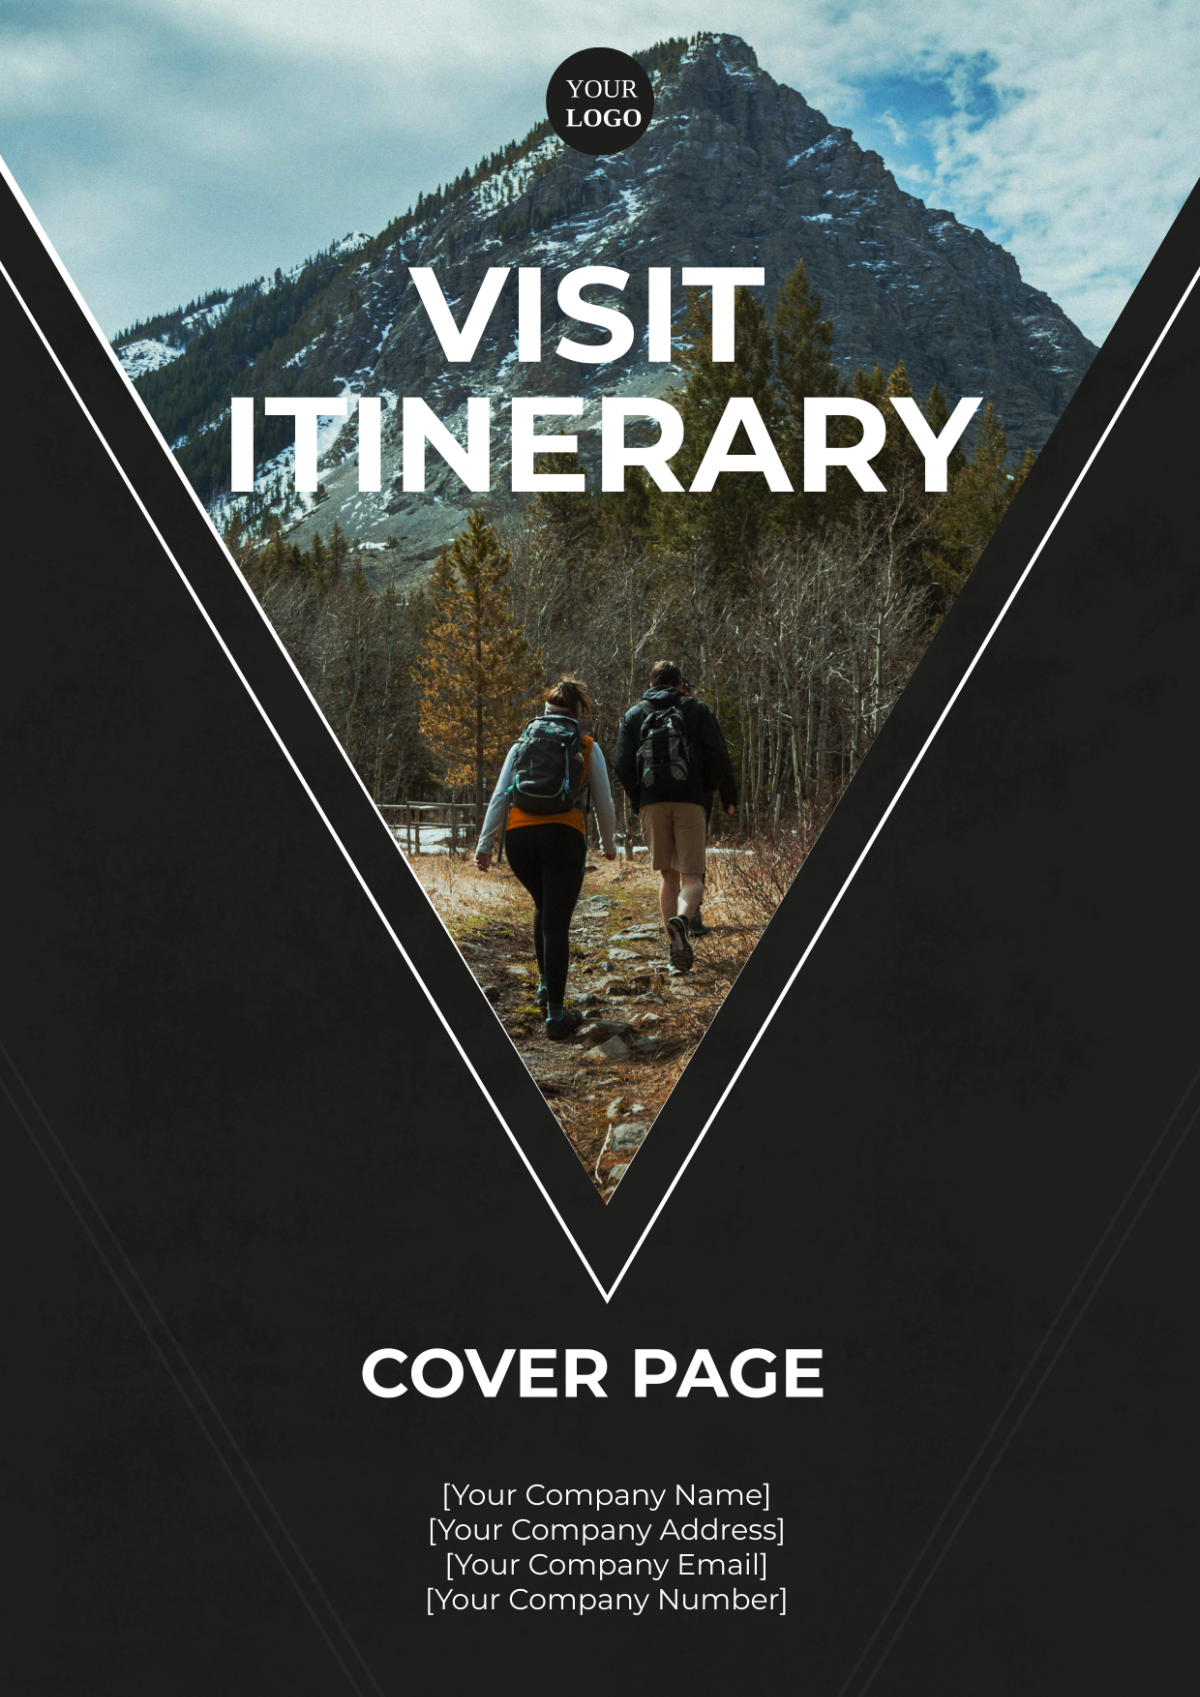 Visit Itinerary Cover Page